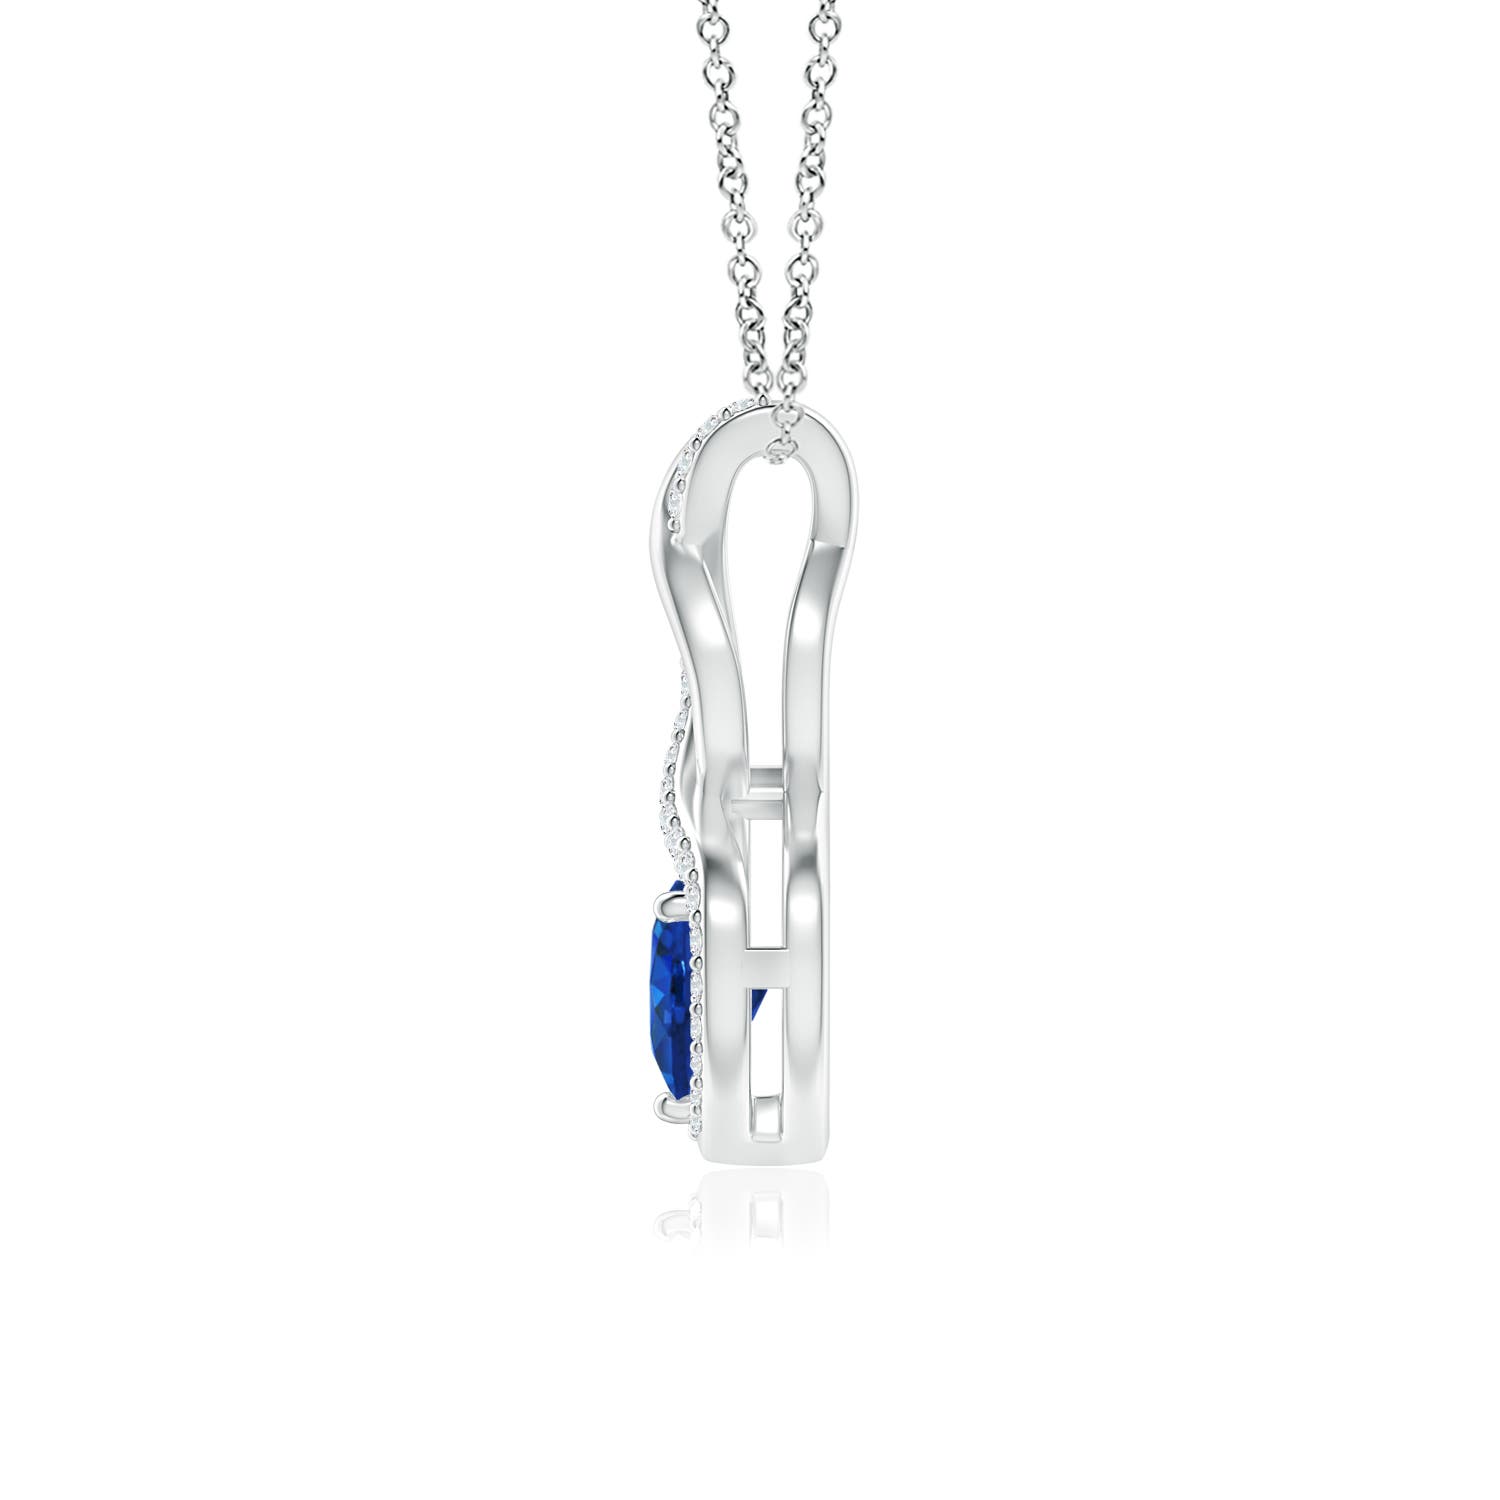 AAA - Blue Sapphire / 0.54 CT / 14 KT White Gold